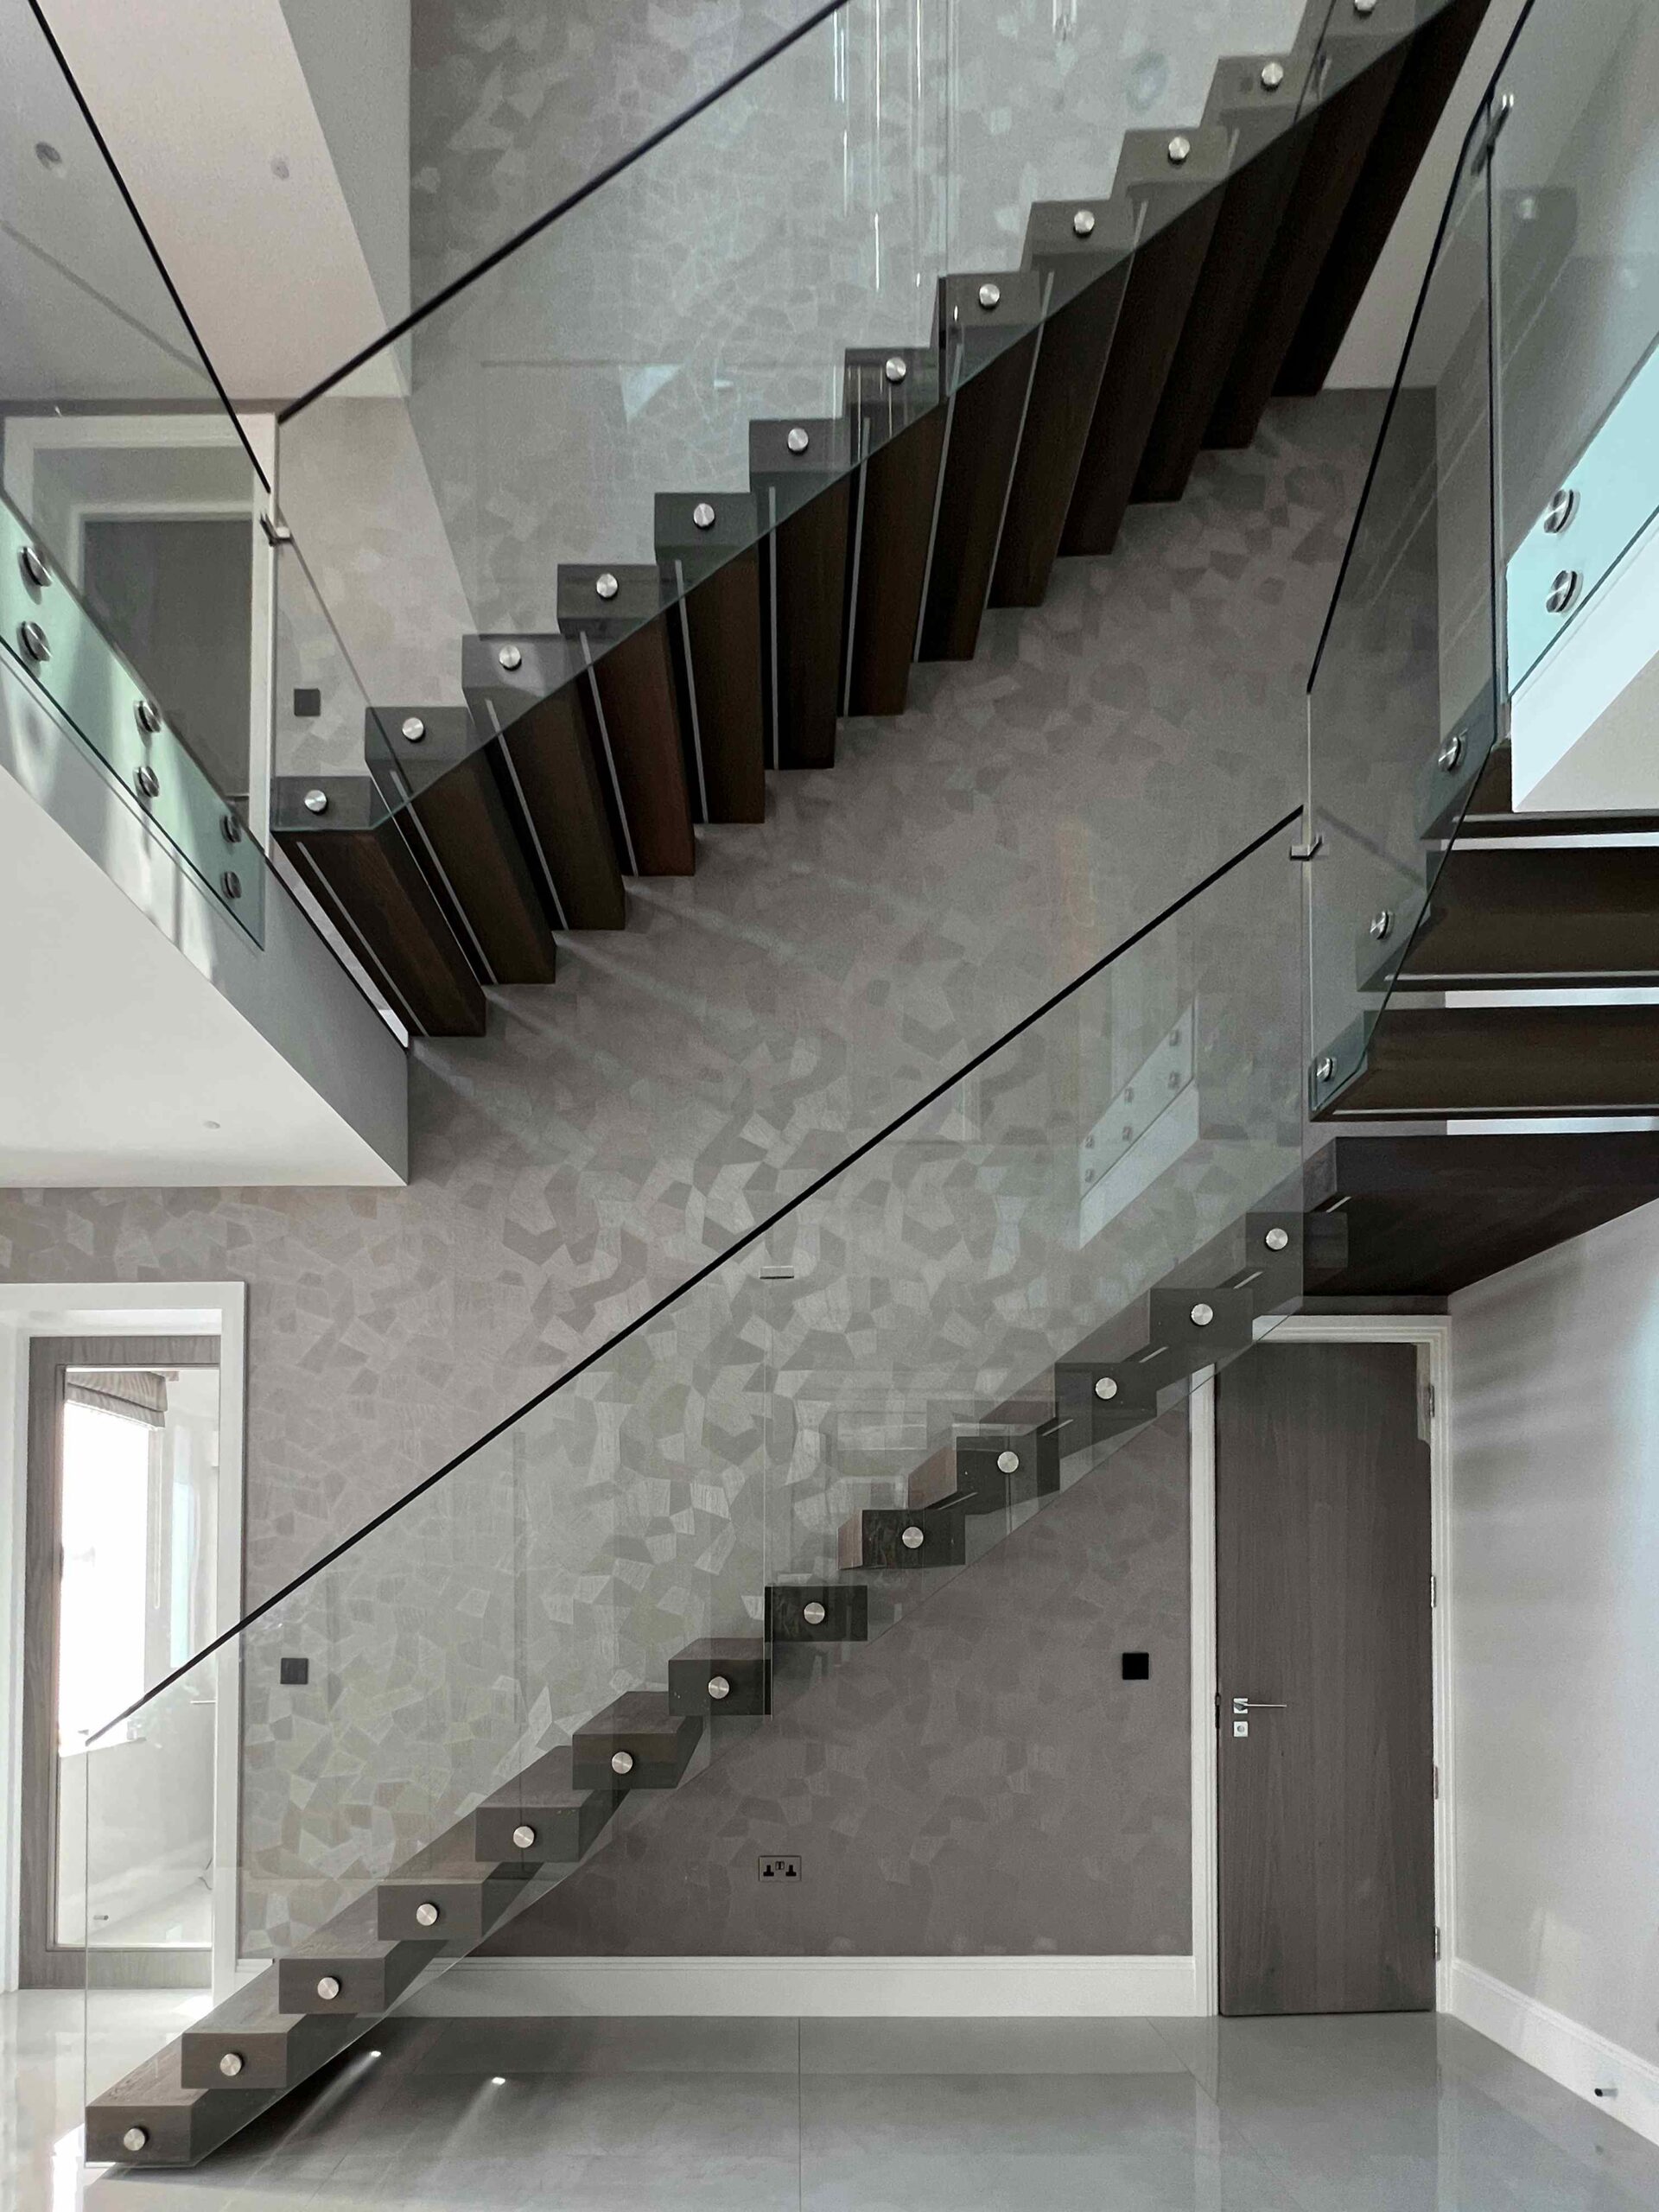 Floating staircase with glass balustrade